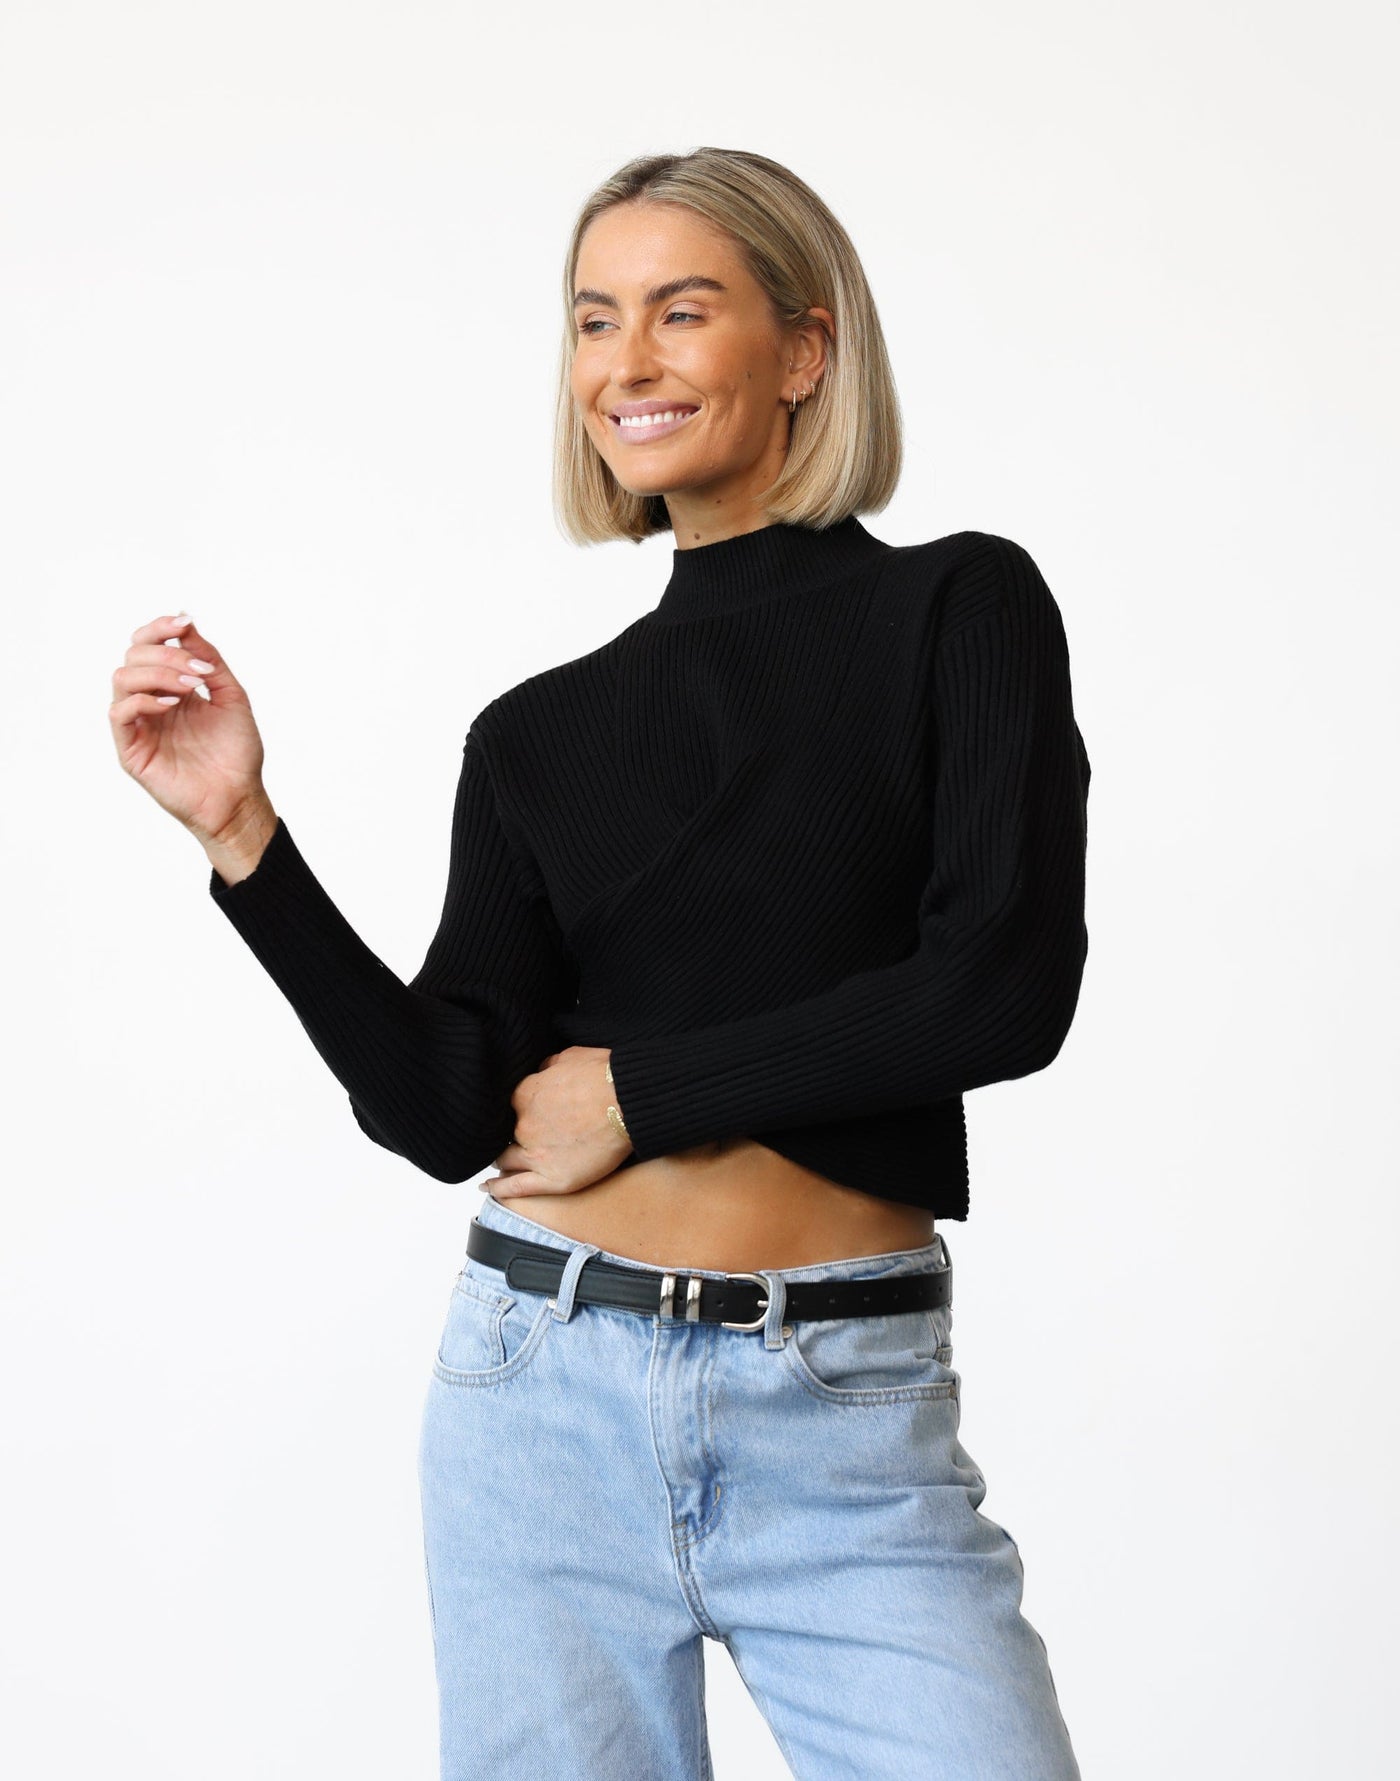 Naomie Jumper (Black) - Crossover High Neck Knit Jumper - Women's Top - Charcoal Clothing